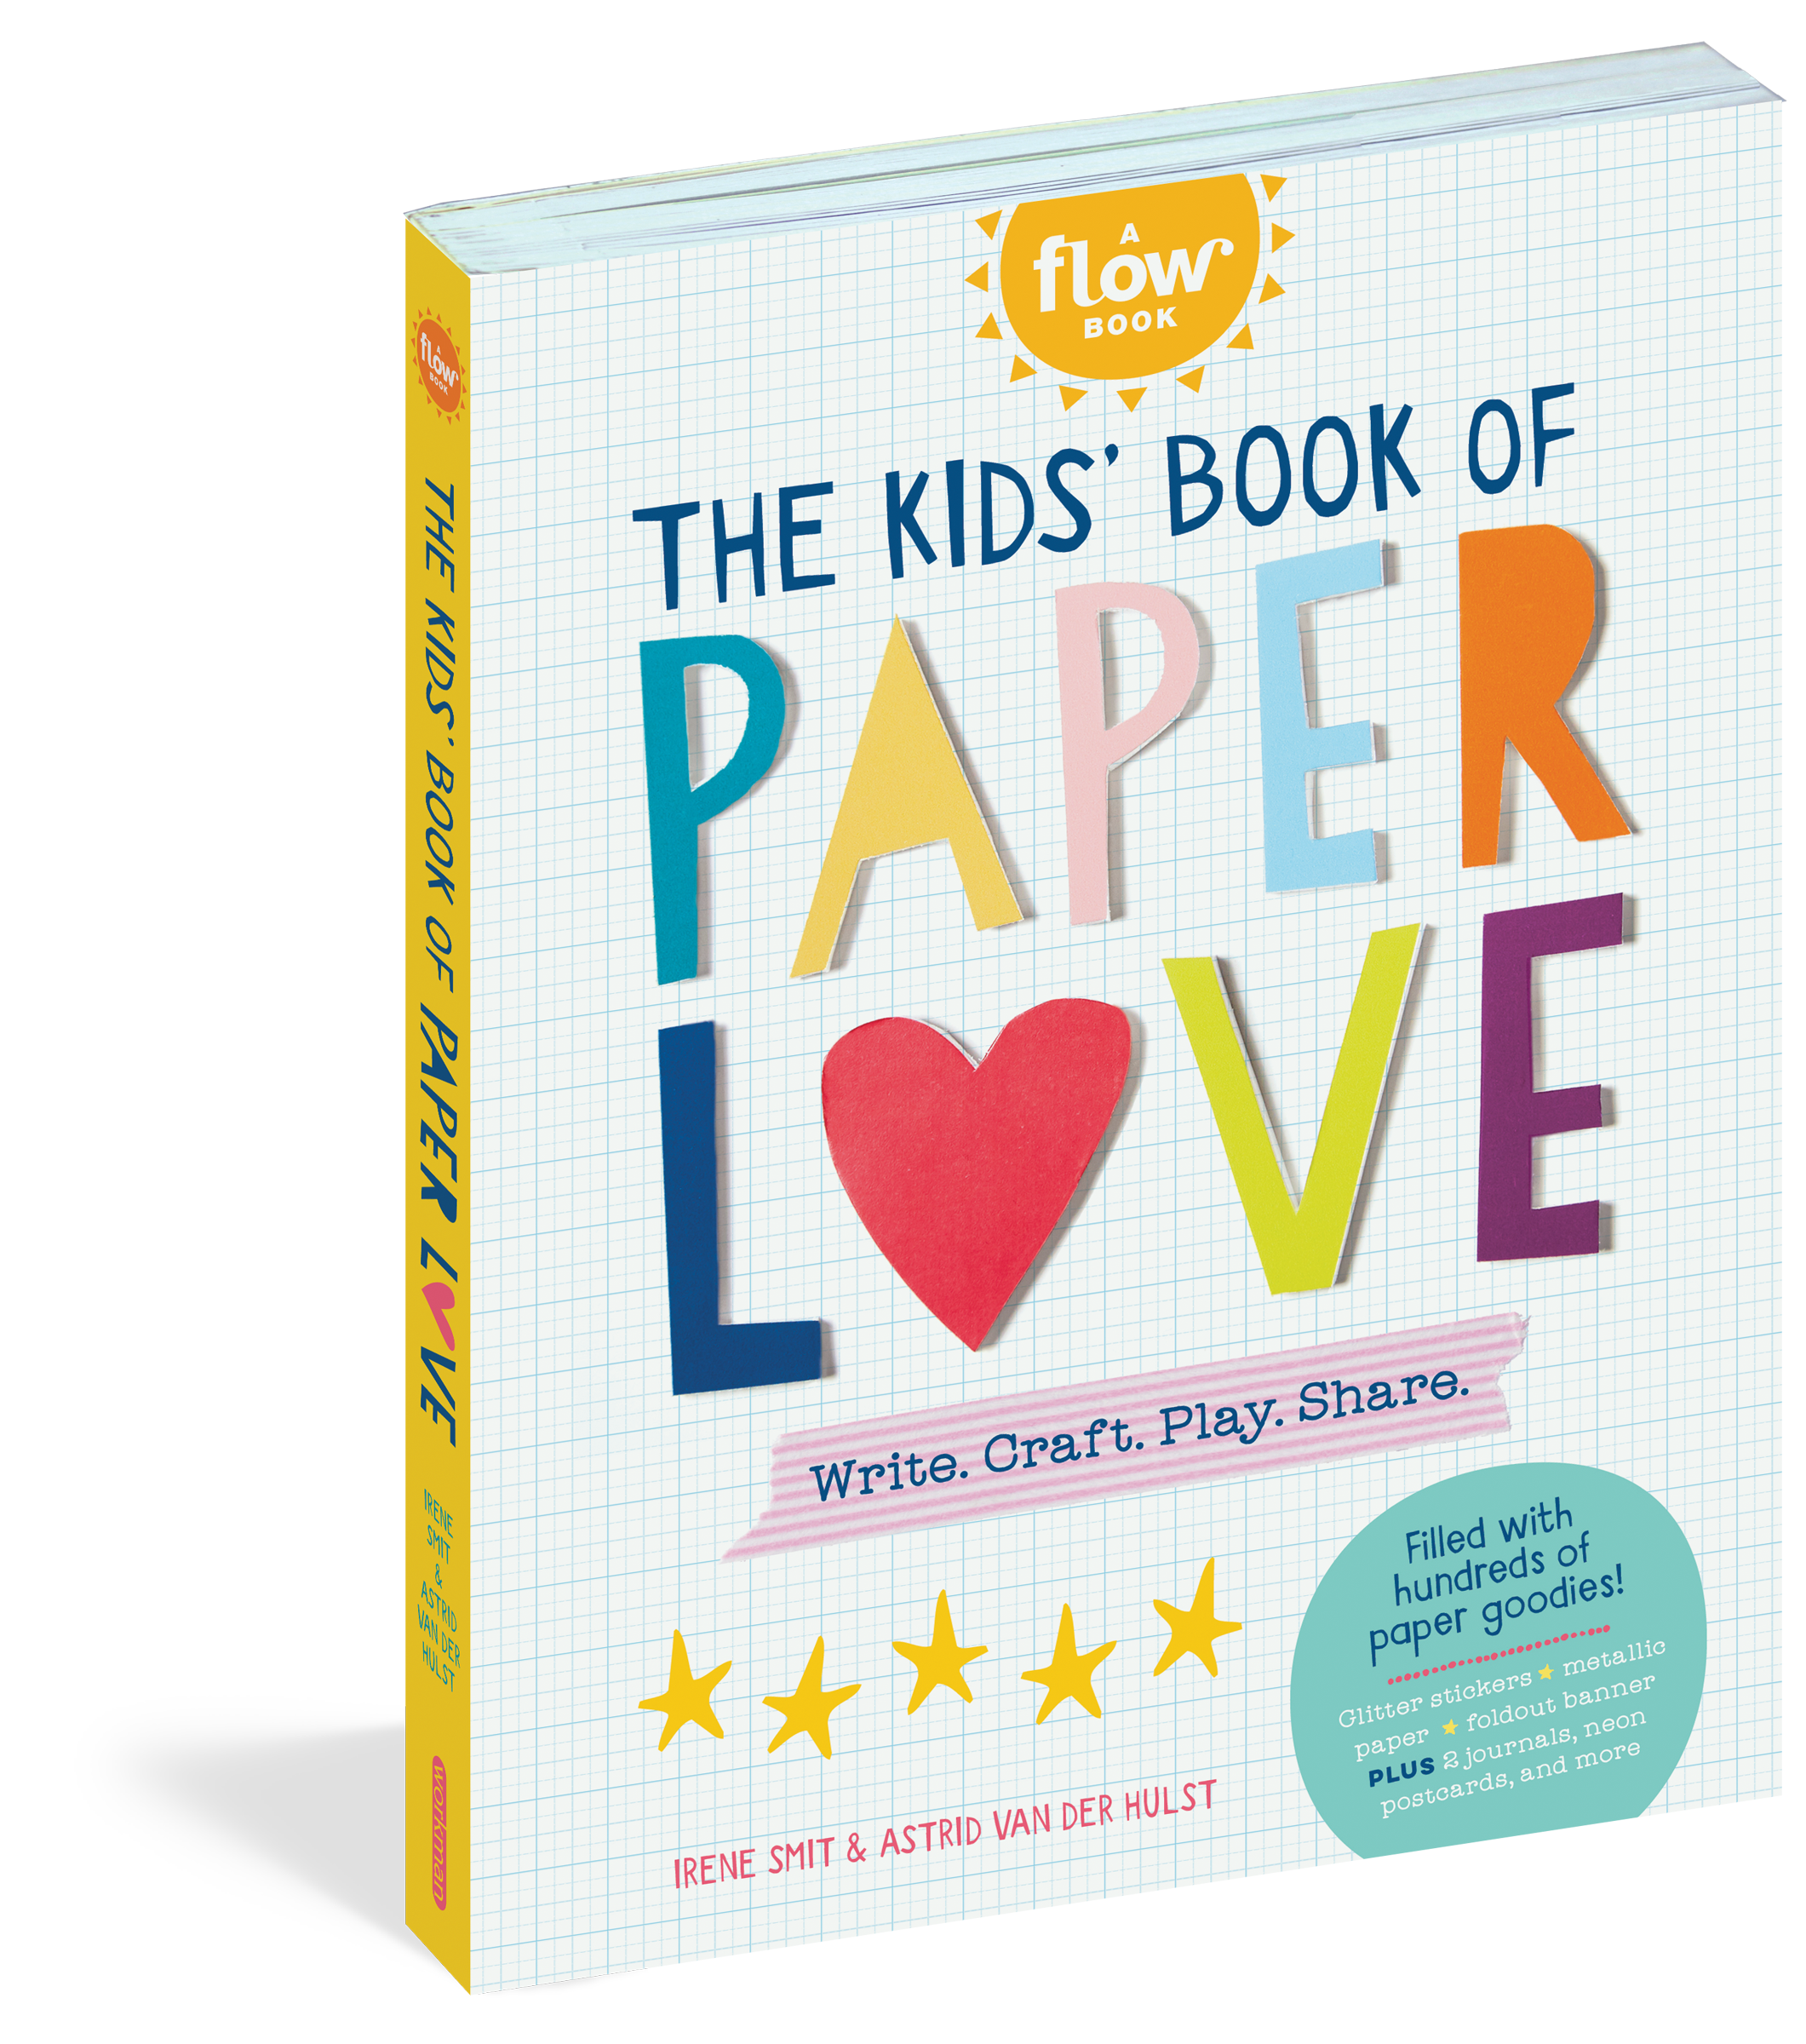 The Kids’ Book of Paper Love Giveaway